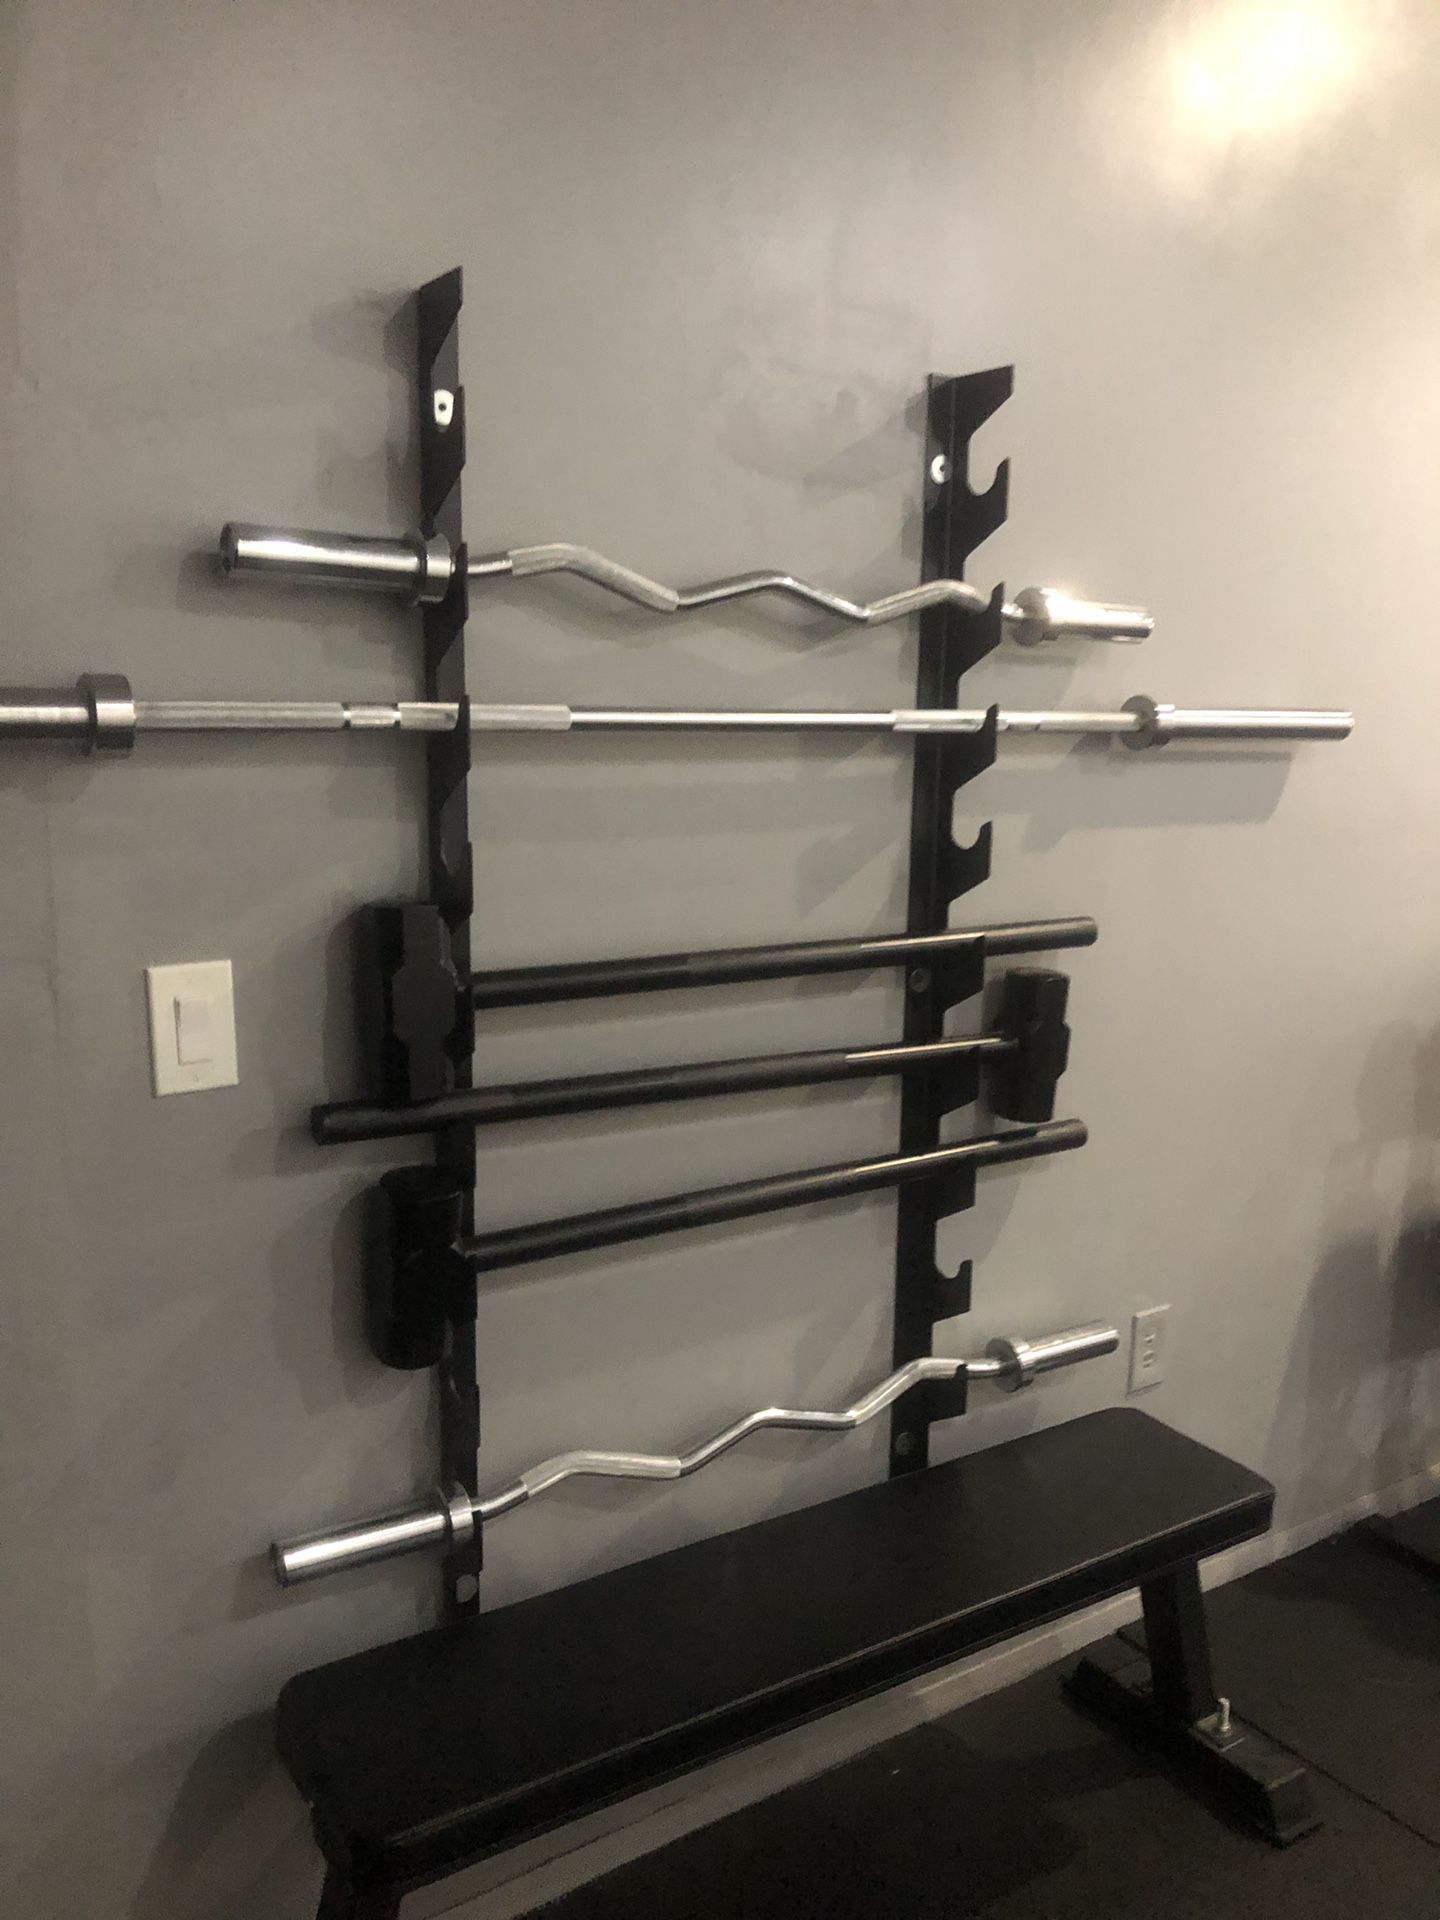 Maces Hammer Exercise Olympic bar Crossfit - each item sold separately